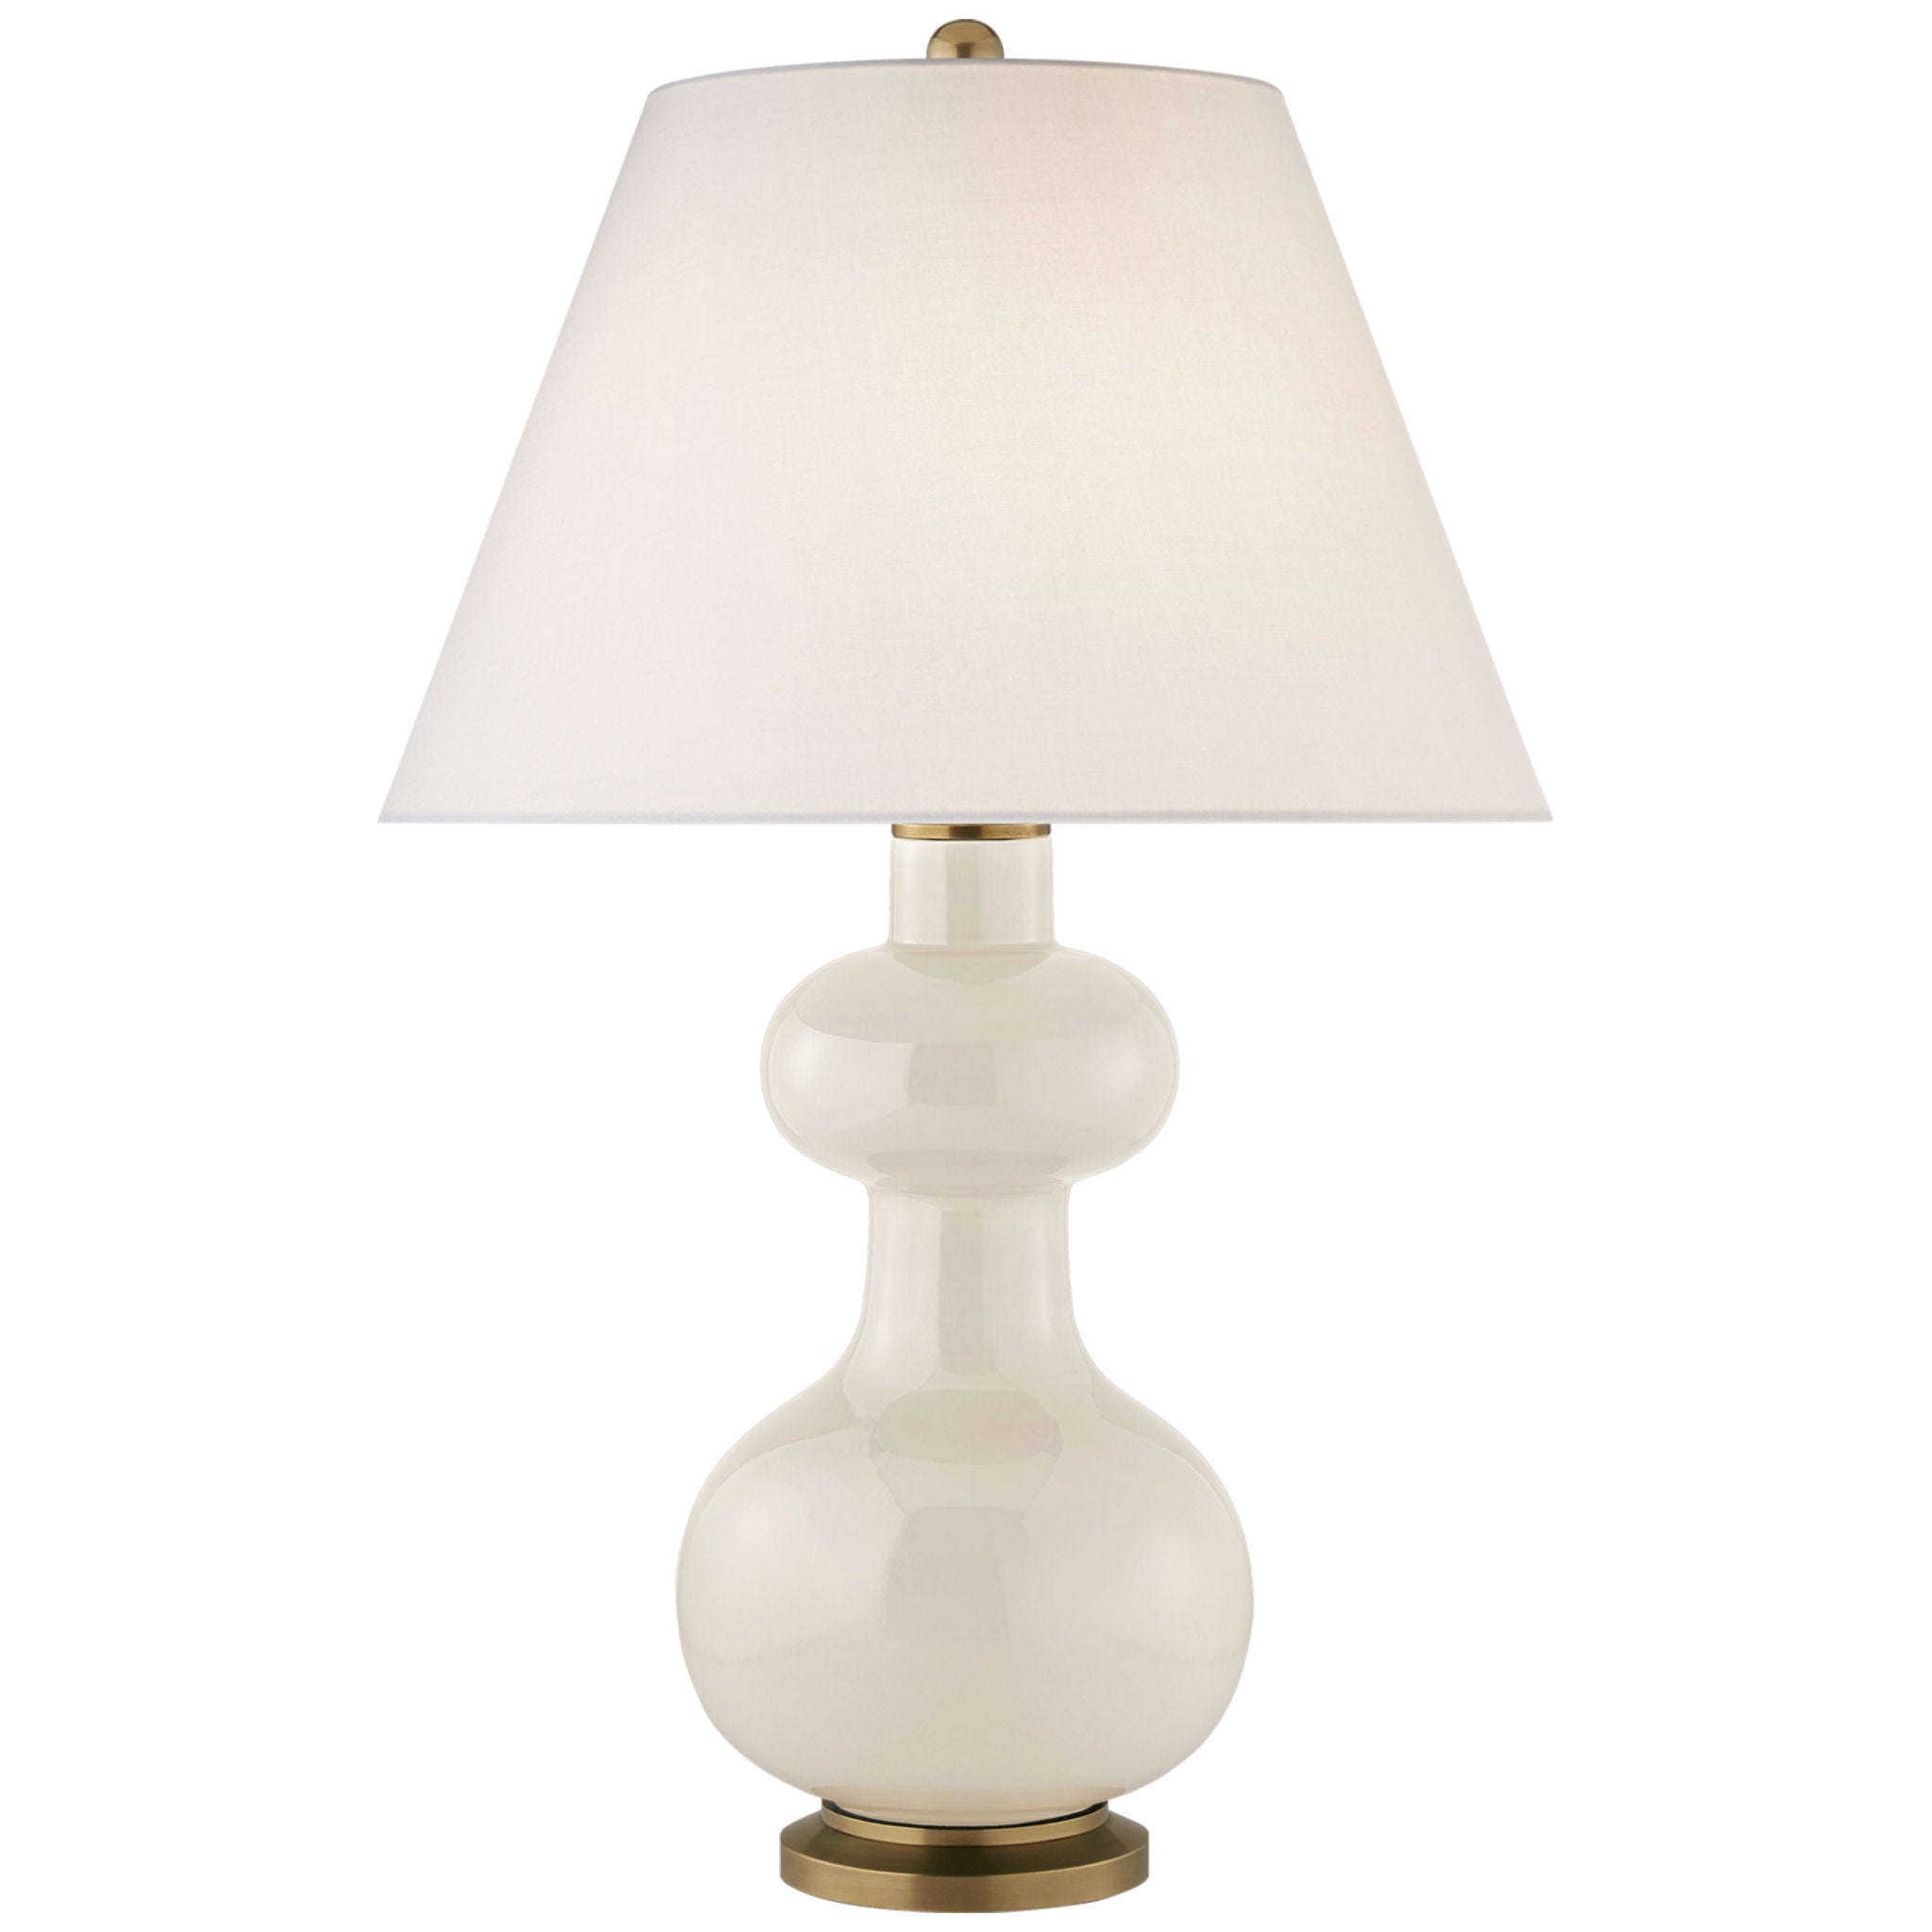 Christopher Spitzmiller Chambers Medium Table Lamp in Ivory with Linen Shade